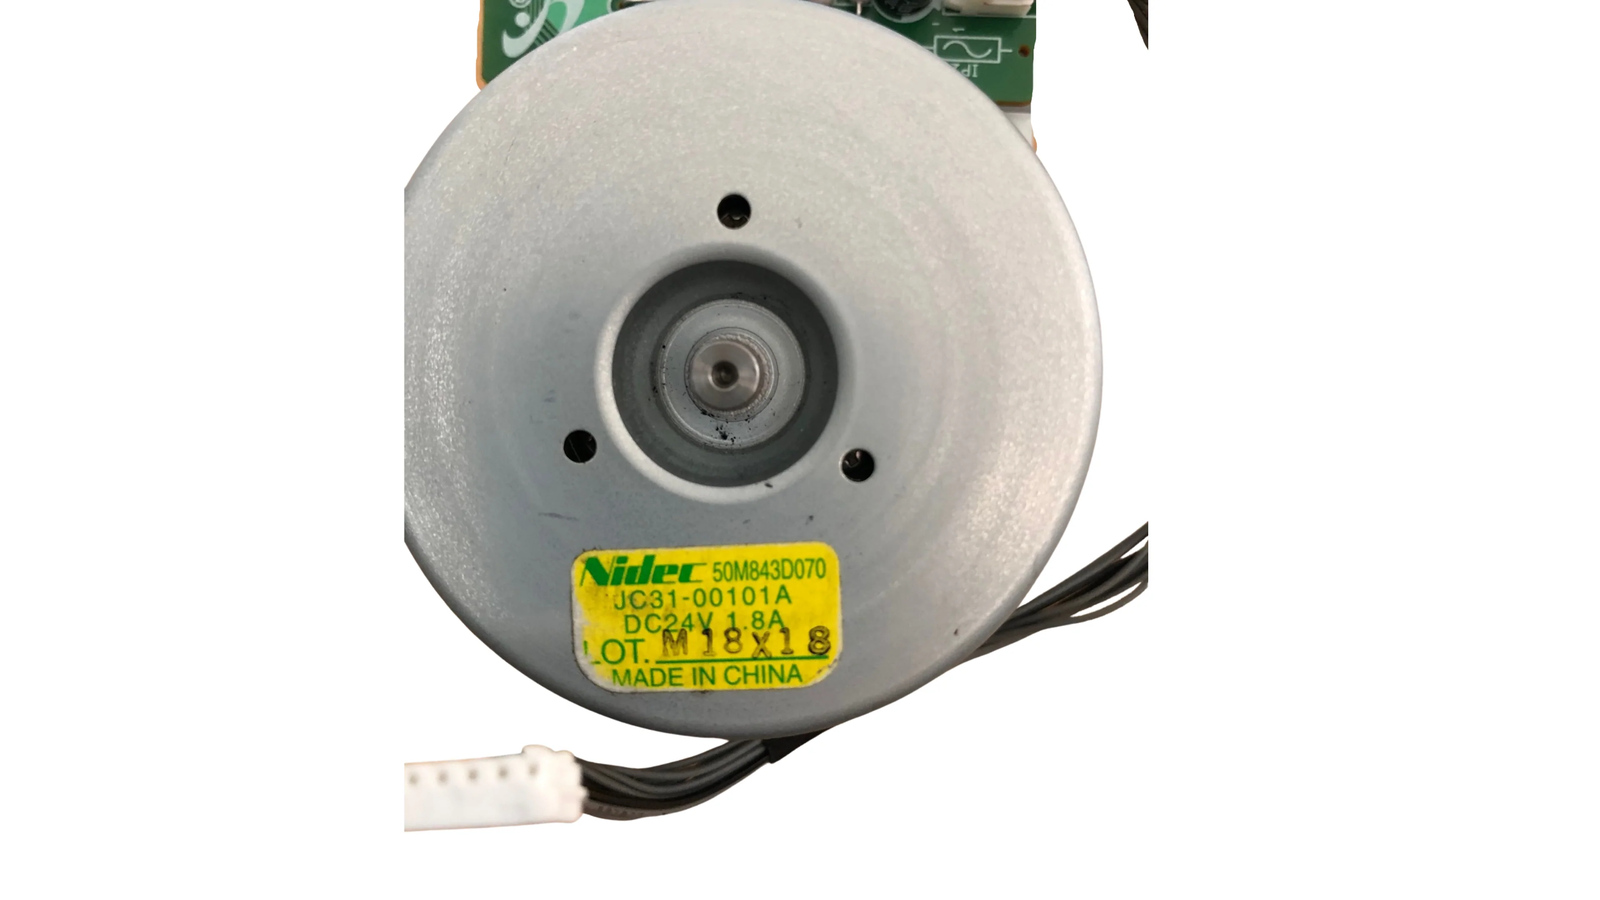 JC31-00101A motor for Dell 2335dn